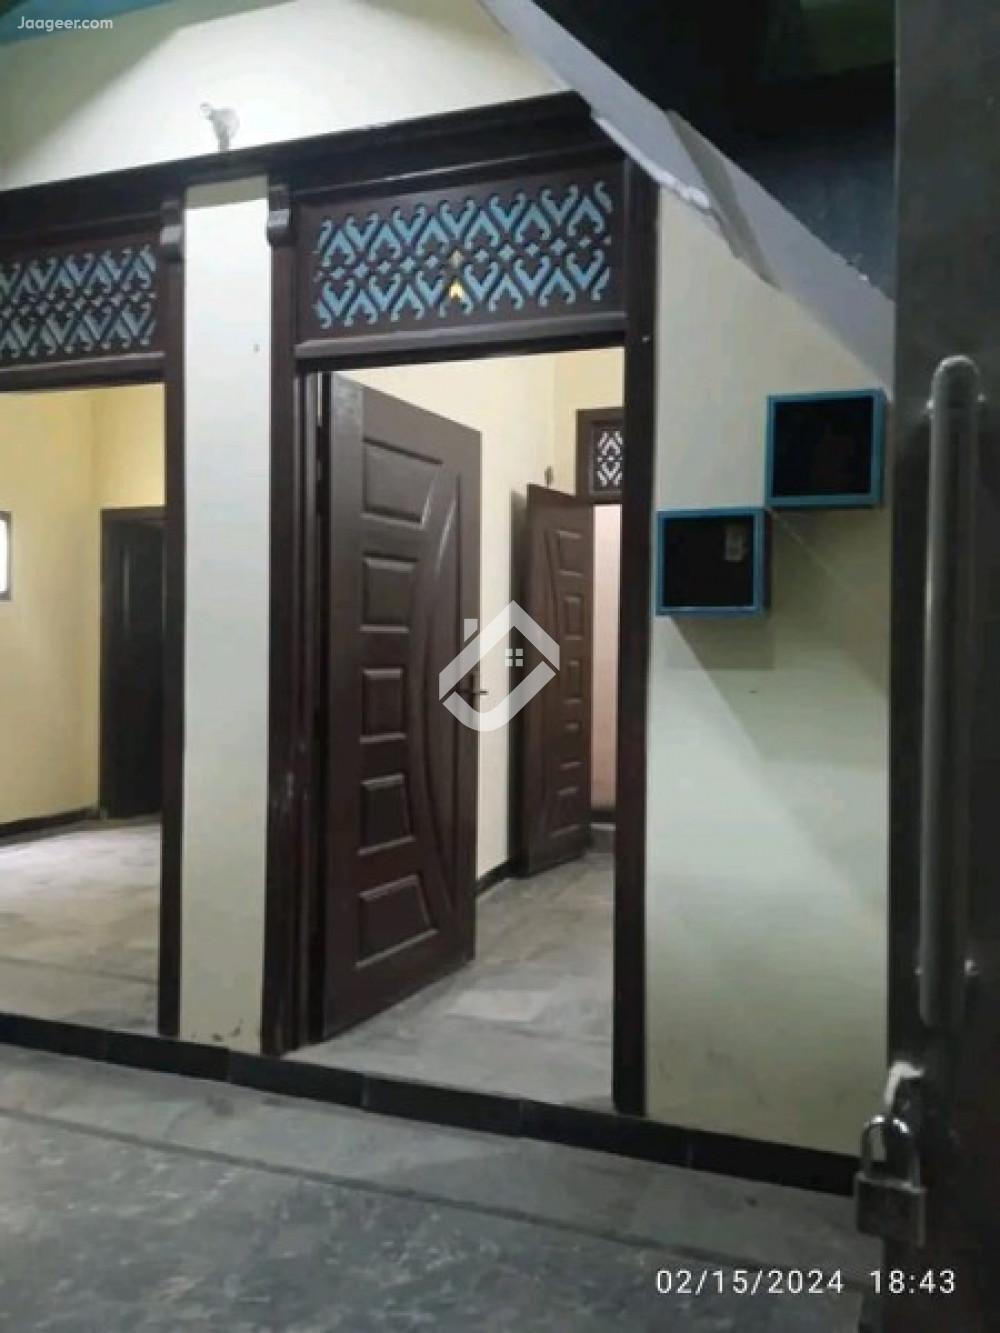 View  2 Marla House For Rent In Wakeel Colony Near Airport Housing Society  in Wakeel Colony , Rawalpindi